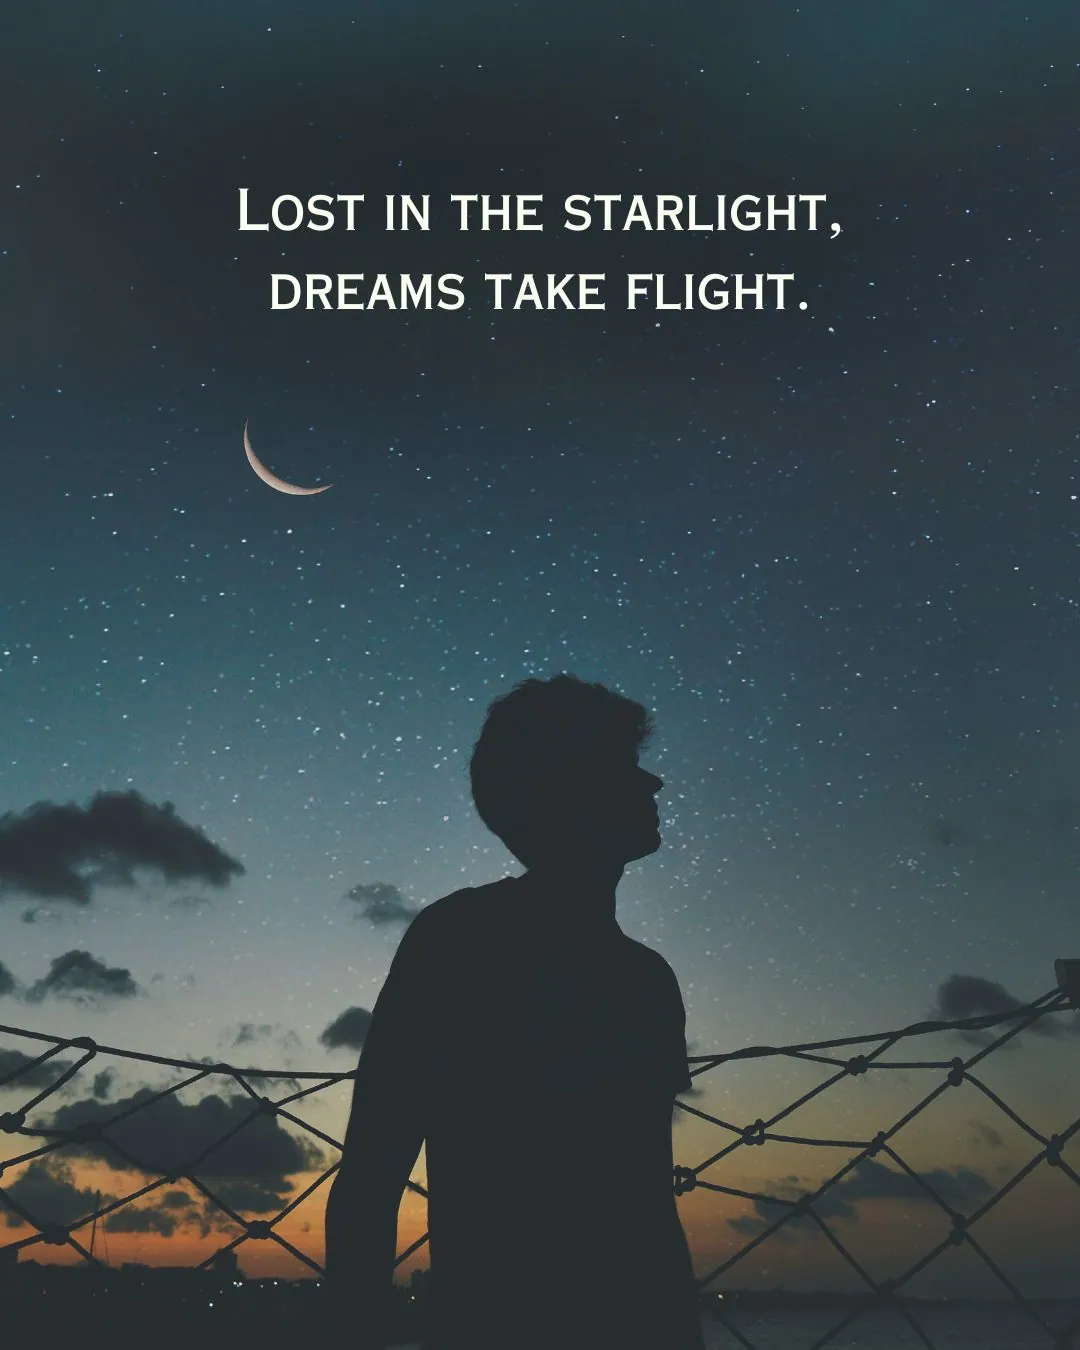 Short Night Sky Quotes for Instagram Image 5